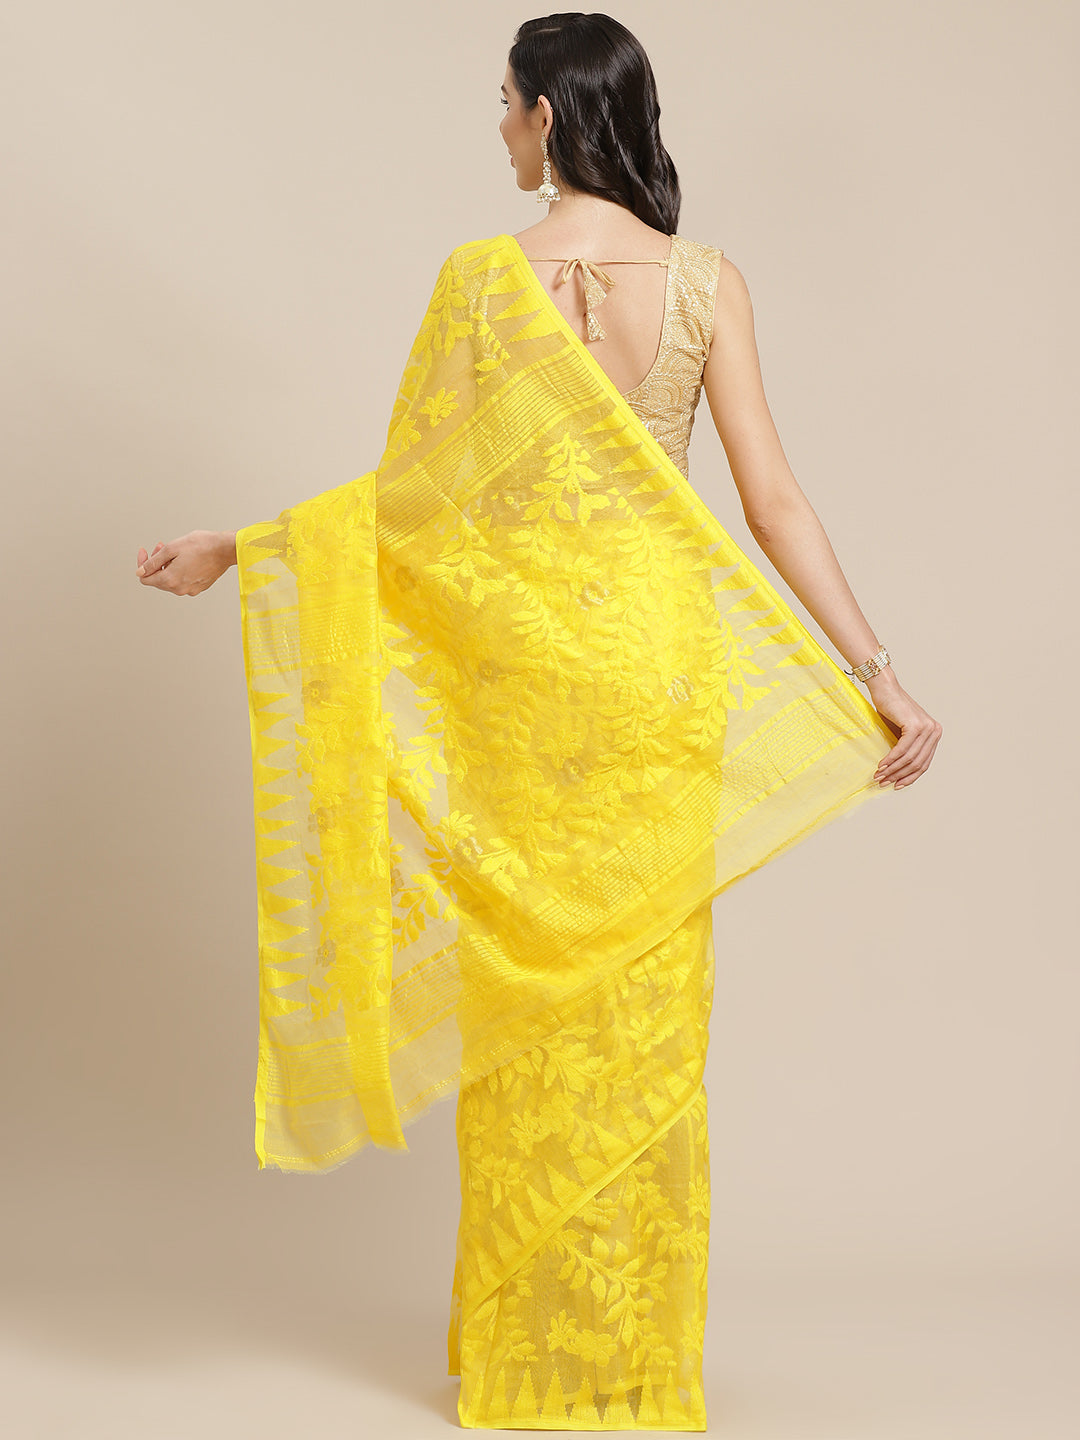 Yellow and Yellow, Kalakari India Jamdani Silk Cotton Woven Design Saree without blouse CHBHSA0001-Saree-Kalakari India-CHBHSA0001-Bengal, Geographical Indication, Hand Crafted, Hand Painted, Heritage Prints, Jamdani, Natural Dyes, Red, Sarees, Silk Blended, Sustainable Fabrics, Woven, Yellow-[Linen,Ethnic,wear,Fashionista,Handloom,Handicraft,Indigo,blockprint,block,print,Cotton,Chanderi,Blue, latest,classy,party,bollywood,trendy,summer,style,traditional,formal,elegant,unique,style,hand,block,pr